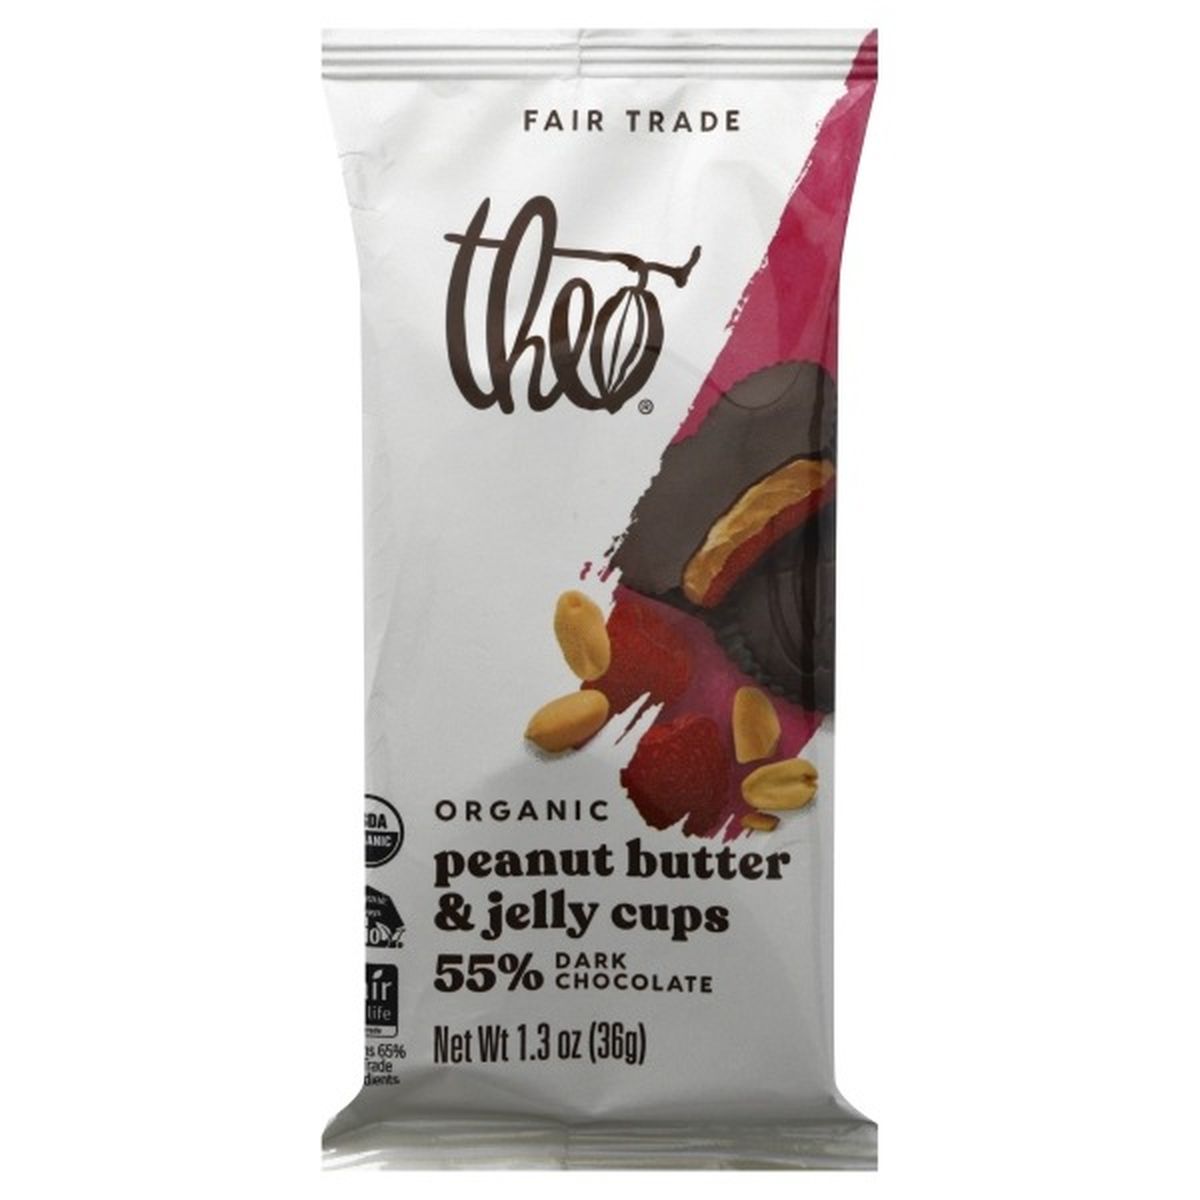 Calories in Theo Chocolate Peanut Butter & Jelly Cups, Organic, 55% Dark Chocolate